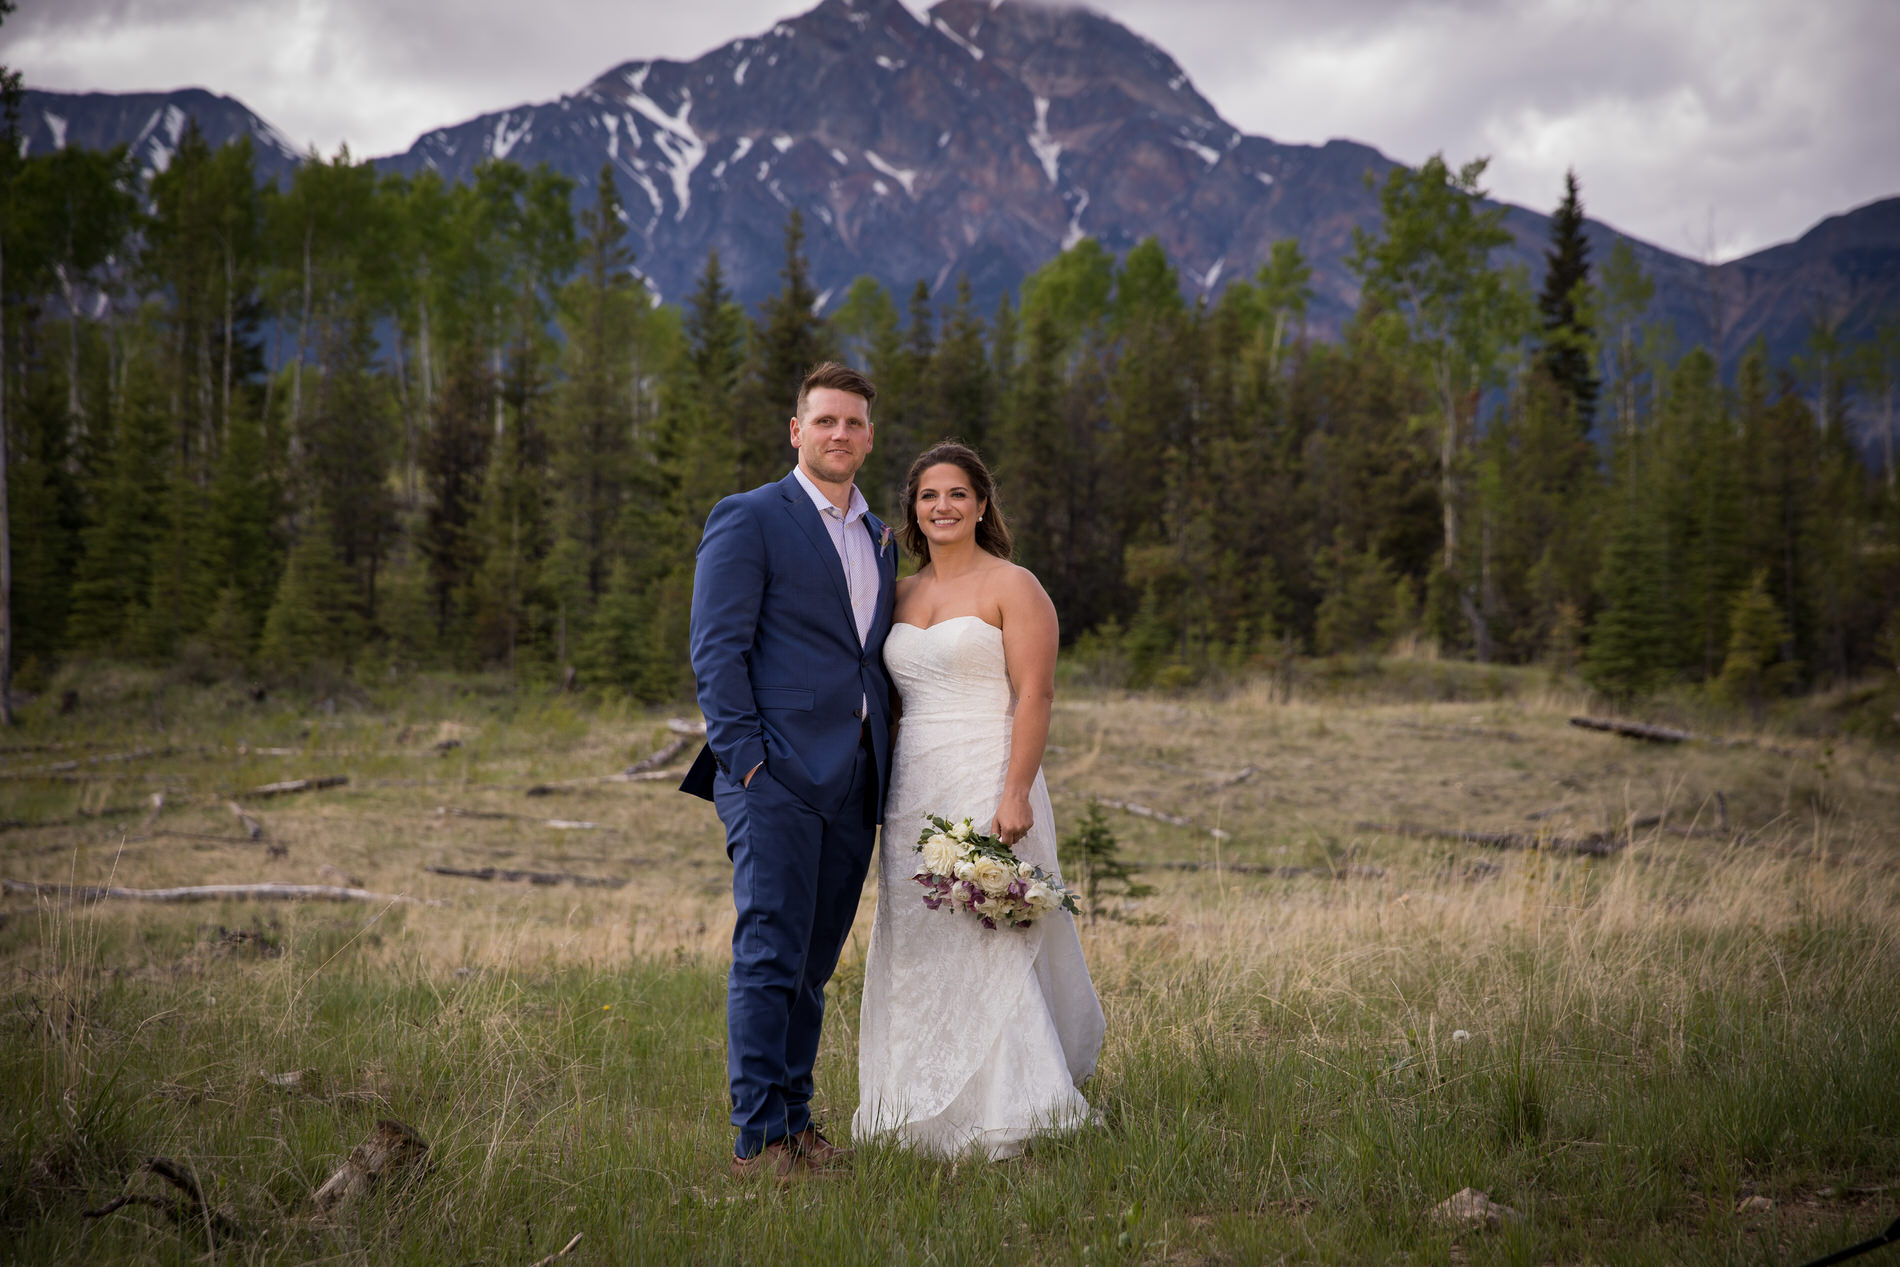 Bride and groom take wedding photos in a field with Pyramid Mountain behind them in Jasper, AB